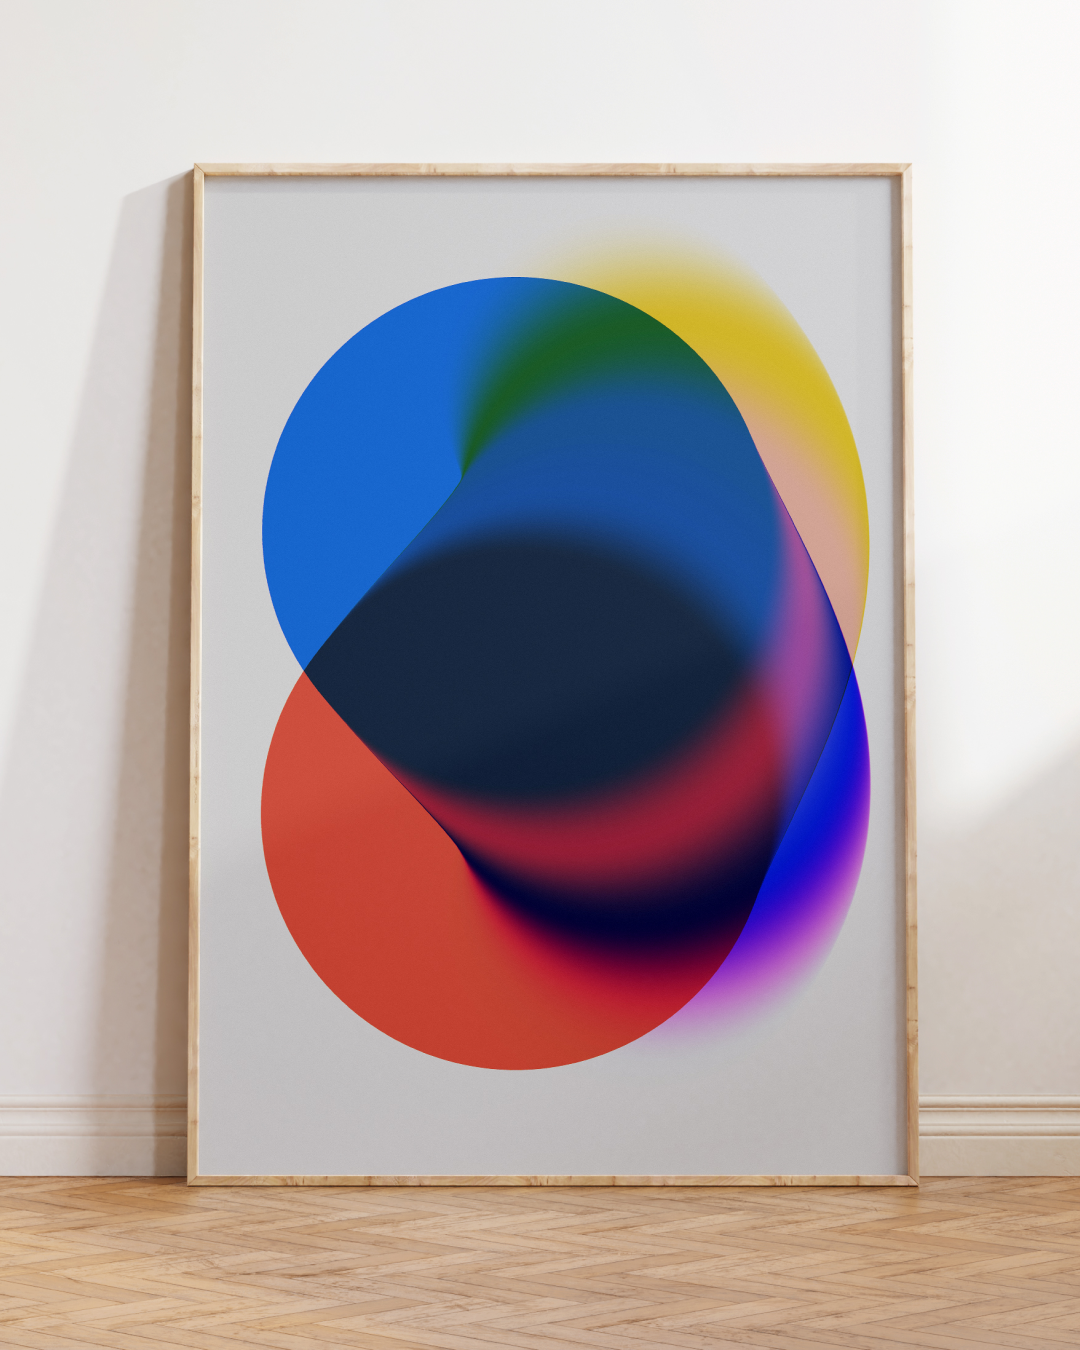 Karmachromax 02 | Art Print, Abstract, Giclèe Printing, Unsigned Limited Edition